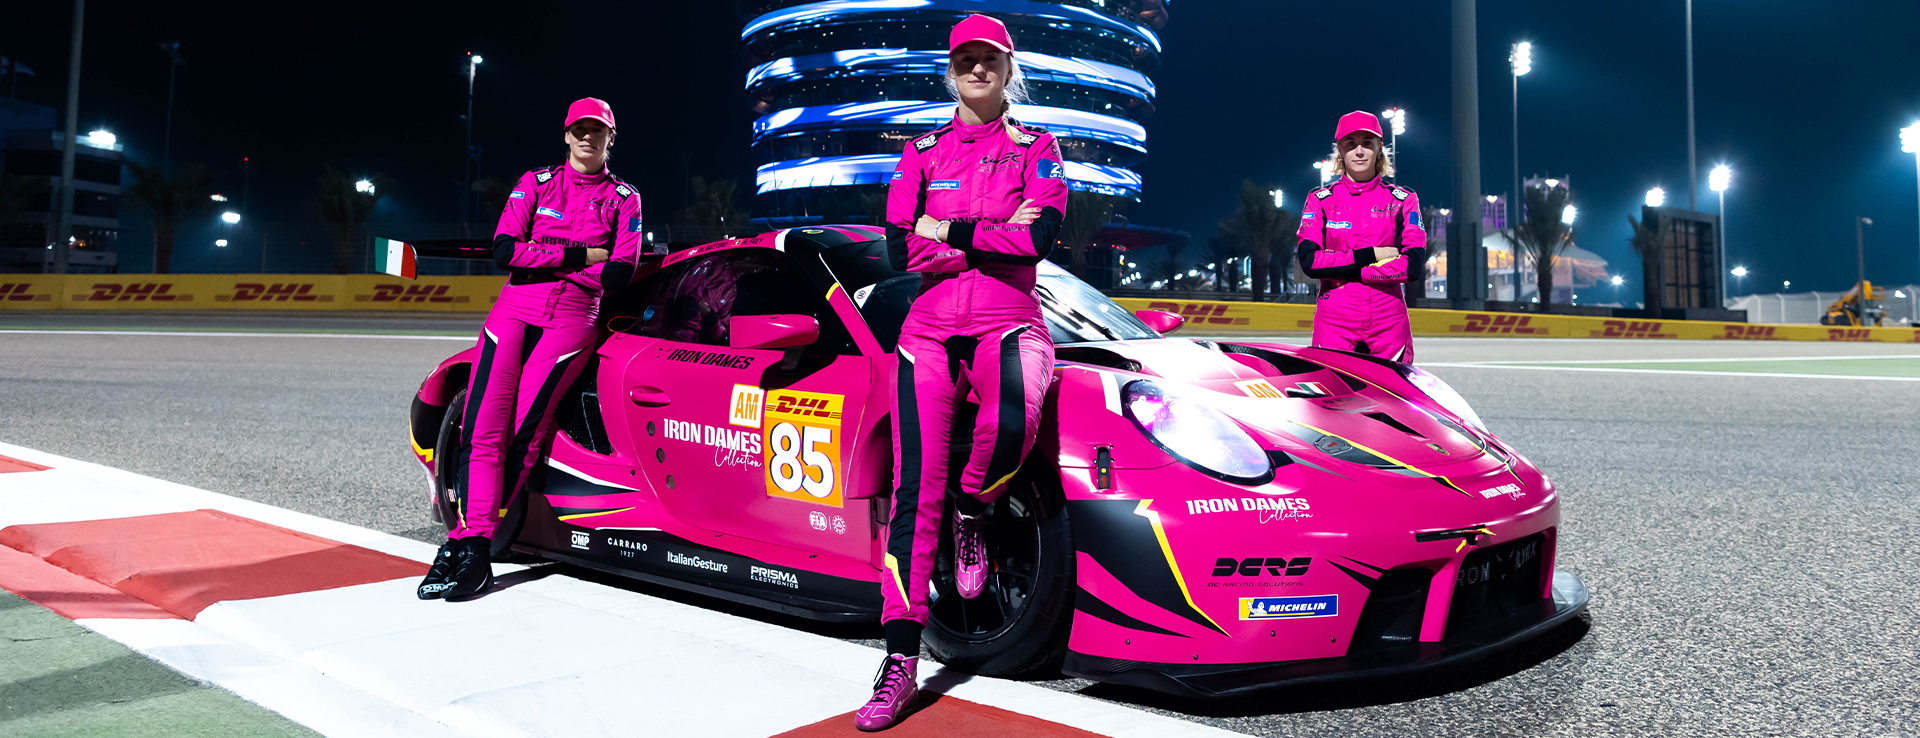 Iron Dames with pink 911 RSR at night on track